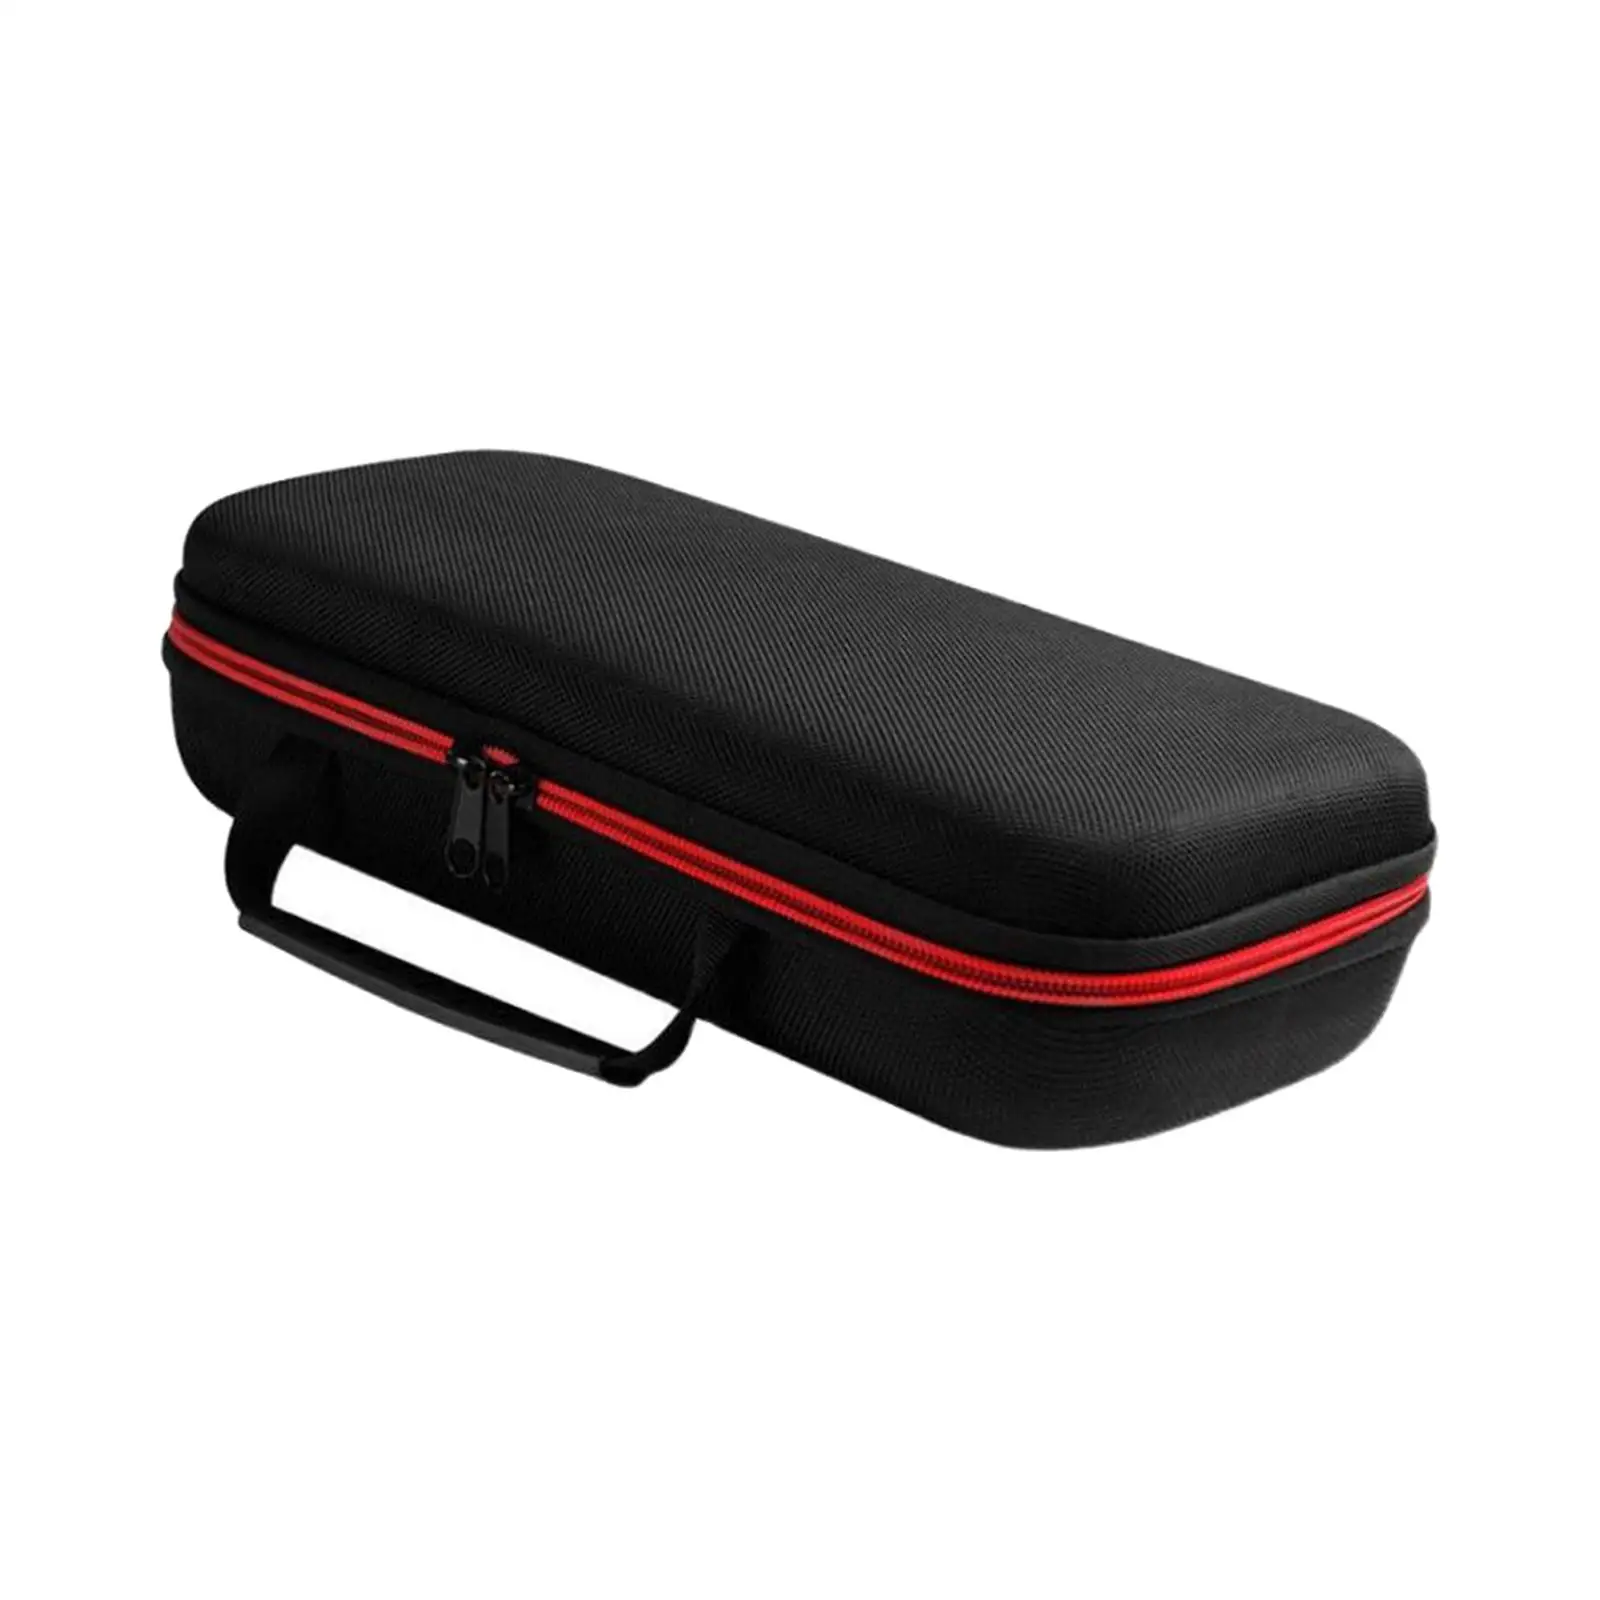 Oxford Cloth Microphone Storage Case Mic Storage Carrying Bag Shockproof Portable Case for Business Travel Outing Trip Camping